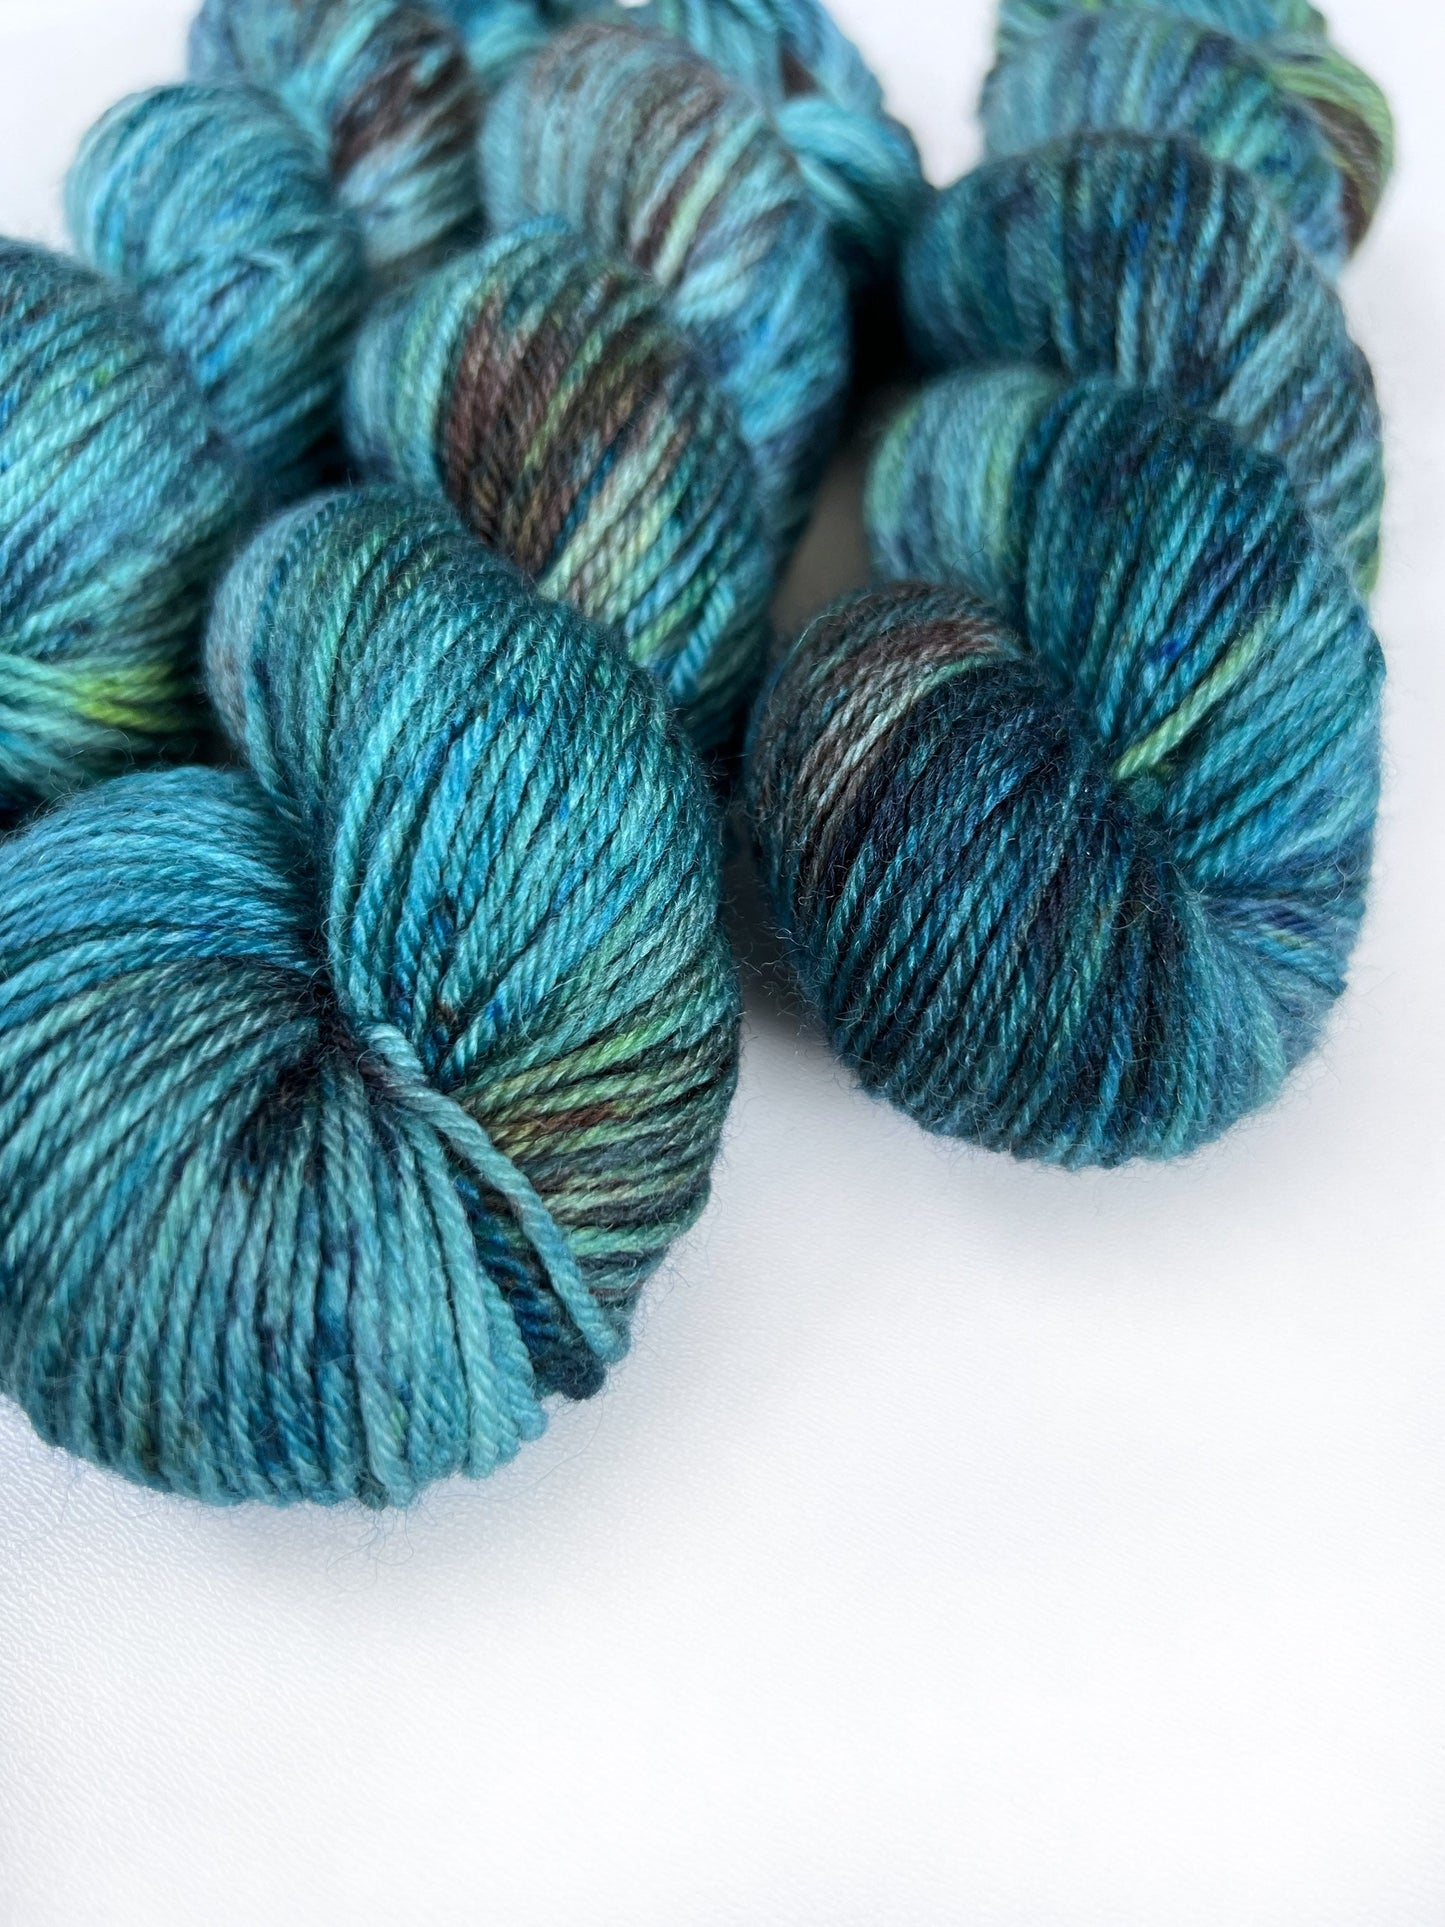 THE WORLD IS YOUR OYSTER - Teal Blue Green Grey Brown Variegated DK